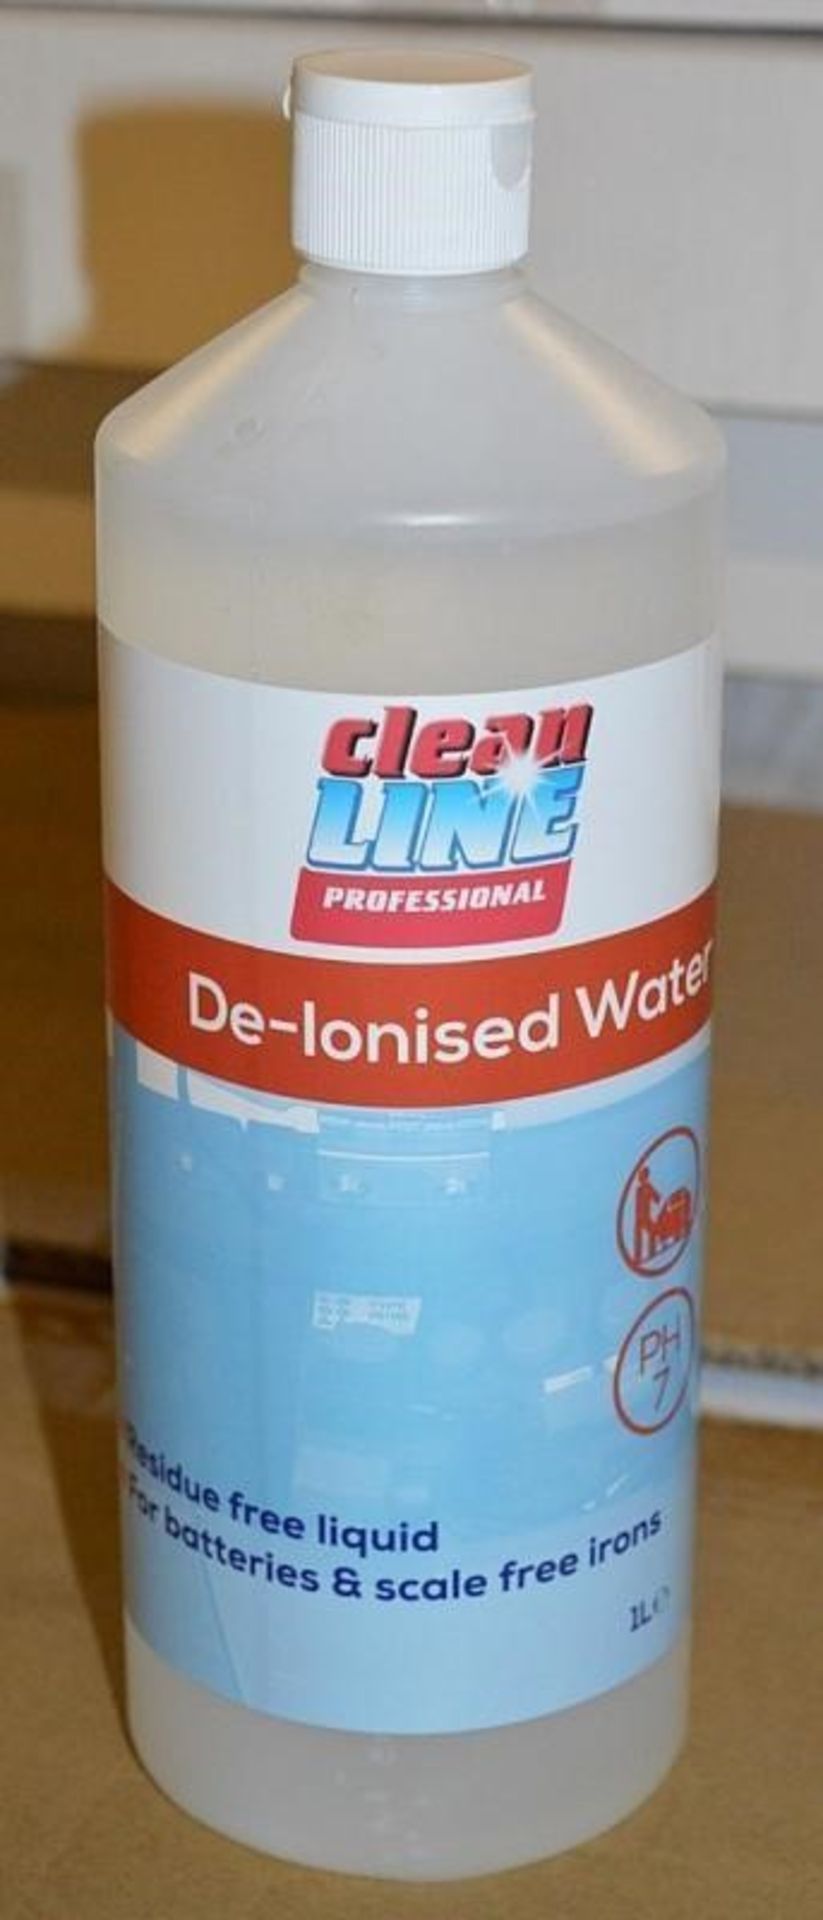 24 x 1-Litre Clean Line Professional Branded De-Ionised (Distilled) Water - New / Unused Stock -